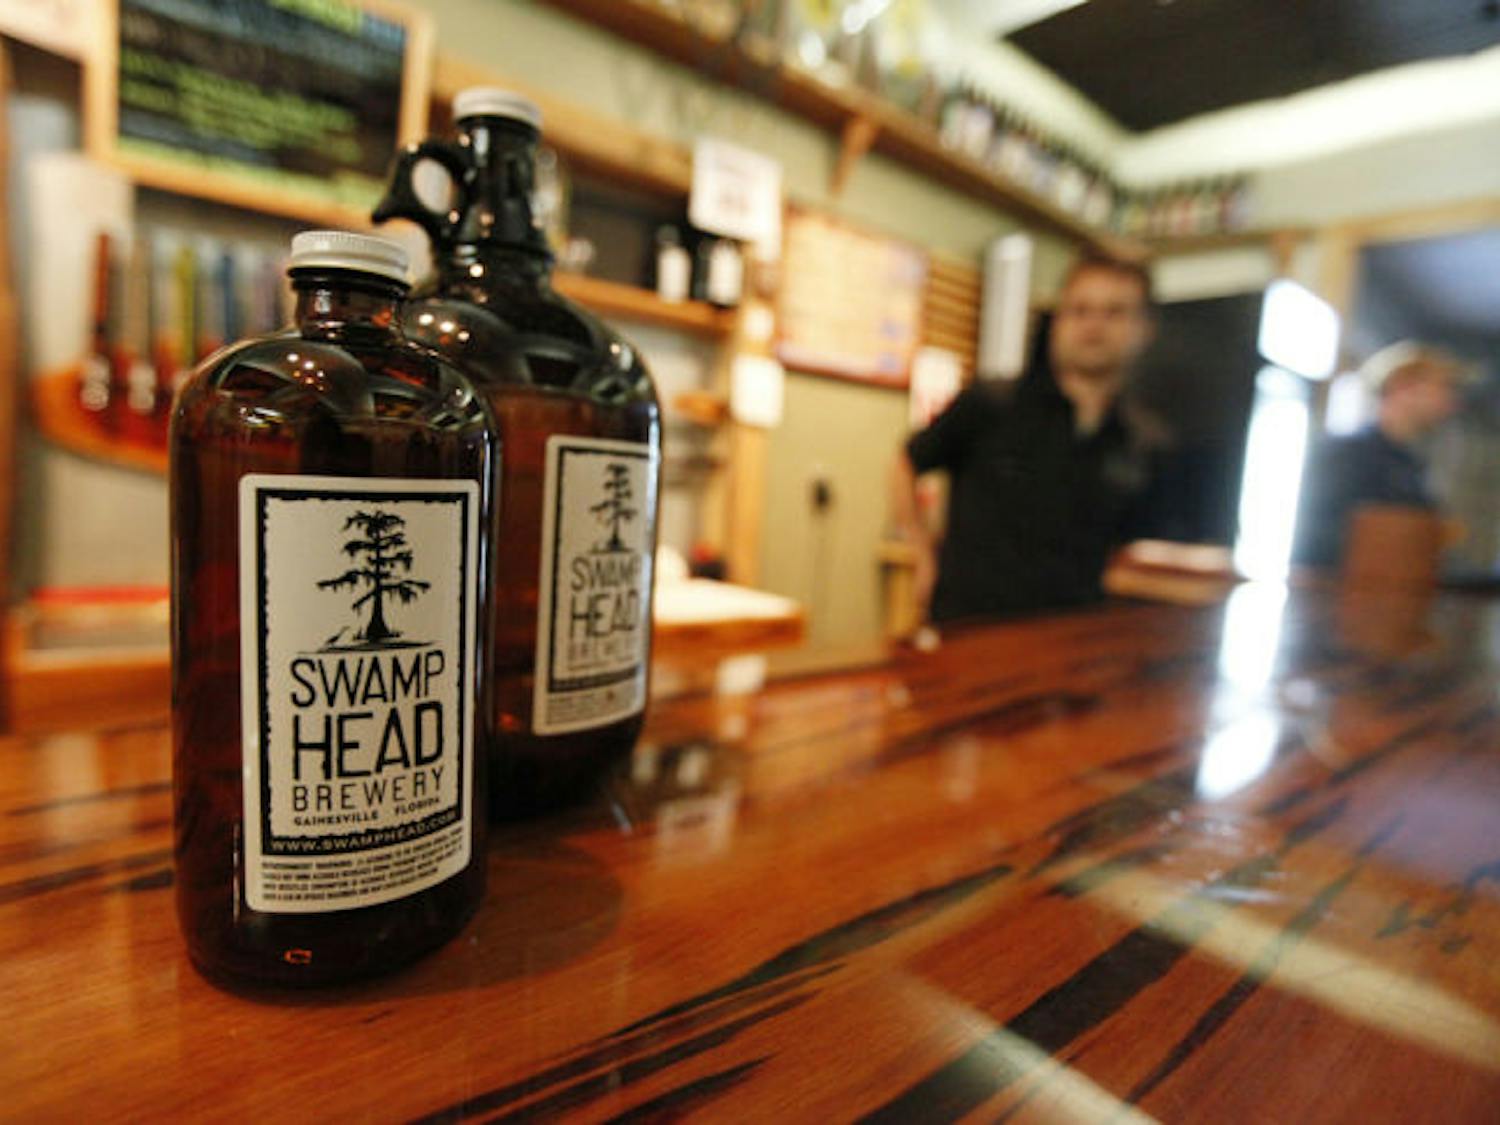 Both 32-ounce jugs and one-gallon jugs of beer, sold at Swamp Head Brewery, are legal container sizes in Florida. Lobbyists are trying to legalize the 64-ounce size beverages.